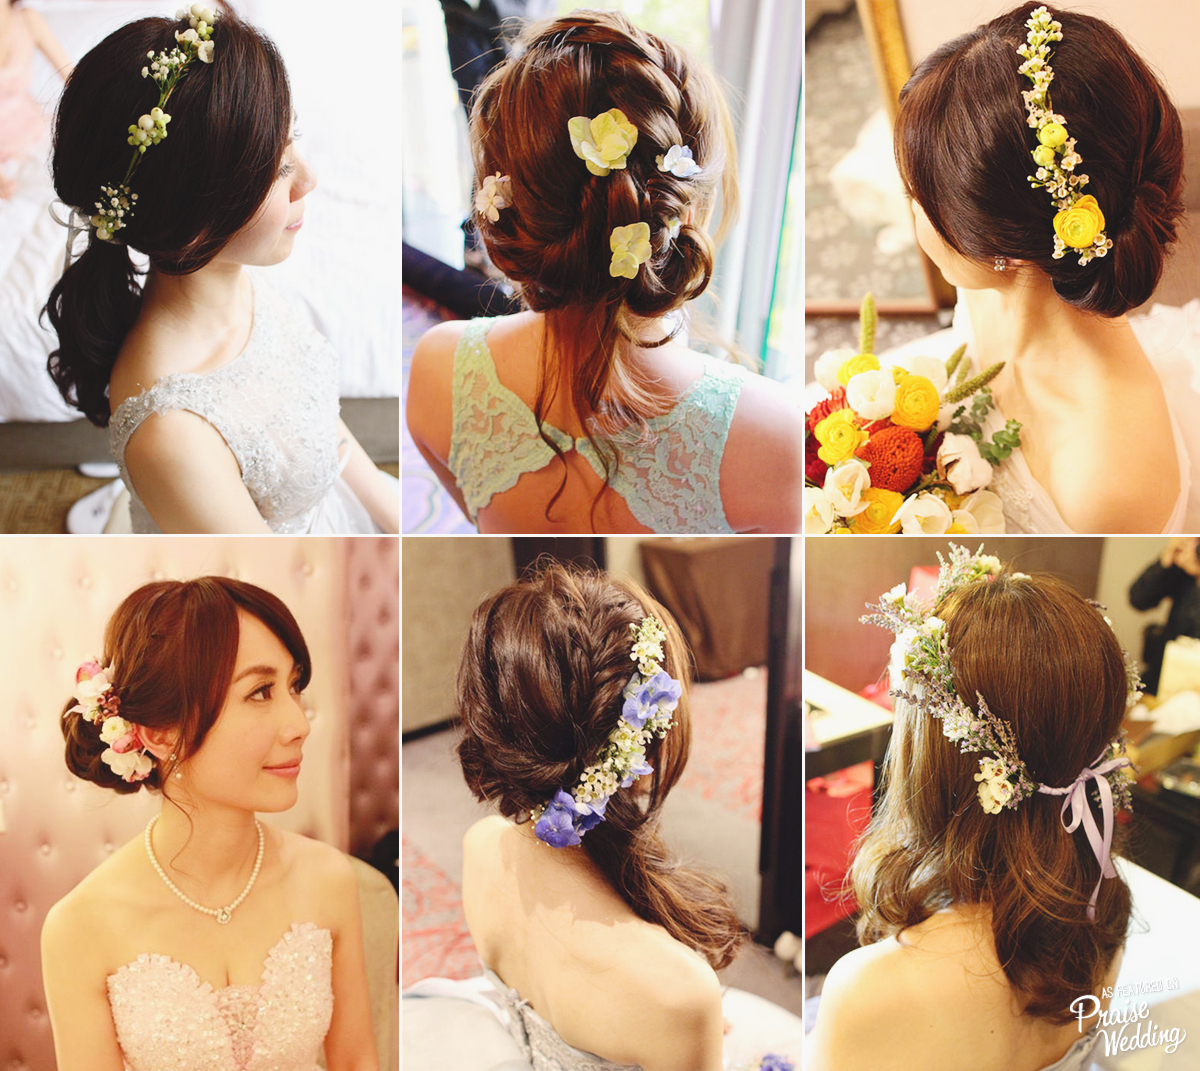 Want to incoporate some florals in your hairstyle? Here are some pretty ways!